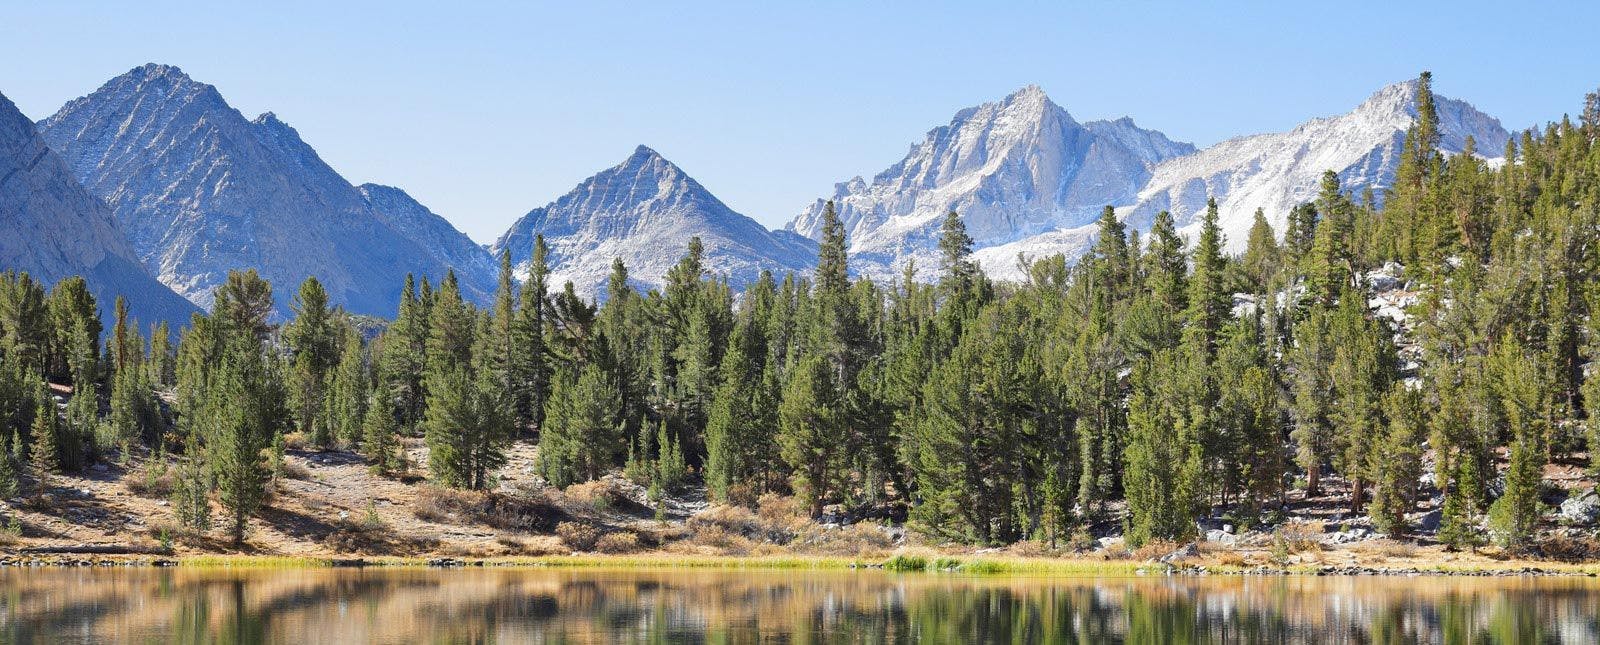 Mammoth Lakes landscape with mountains, forests, and lake